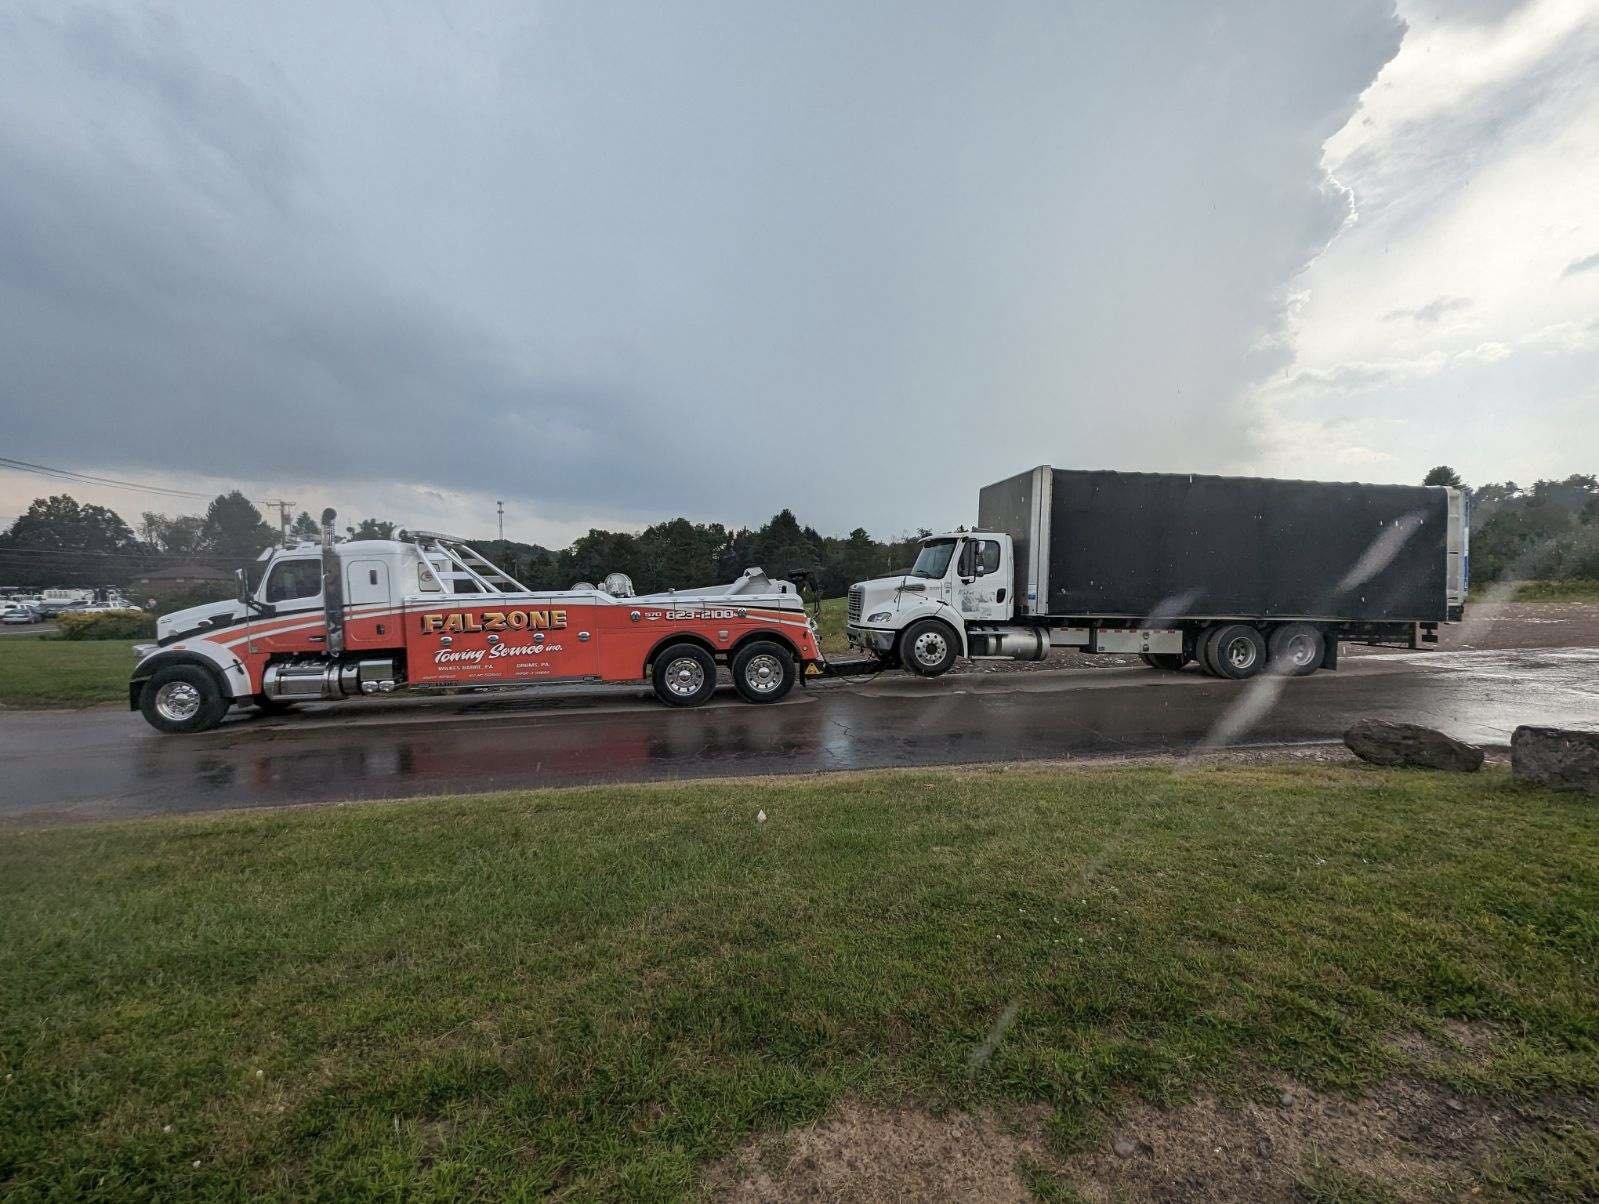 Read more about the article The Straight Truck Dilemma: Route 29 Heavy Towing